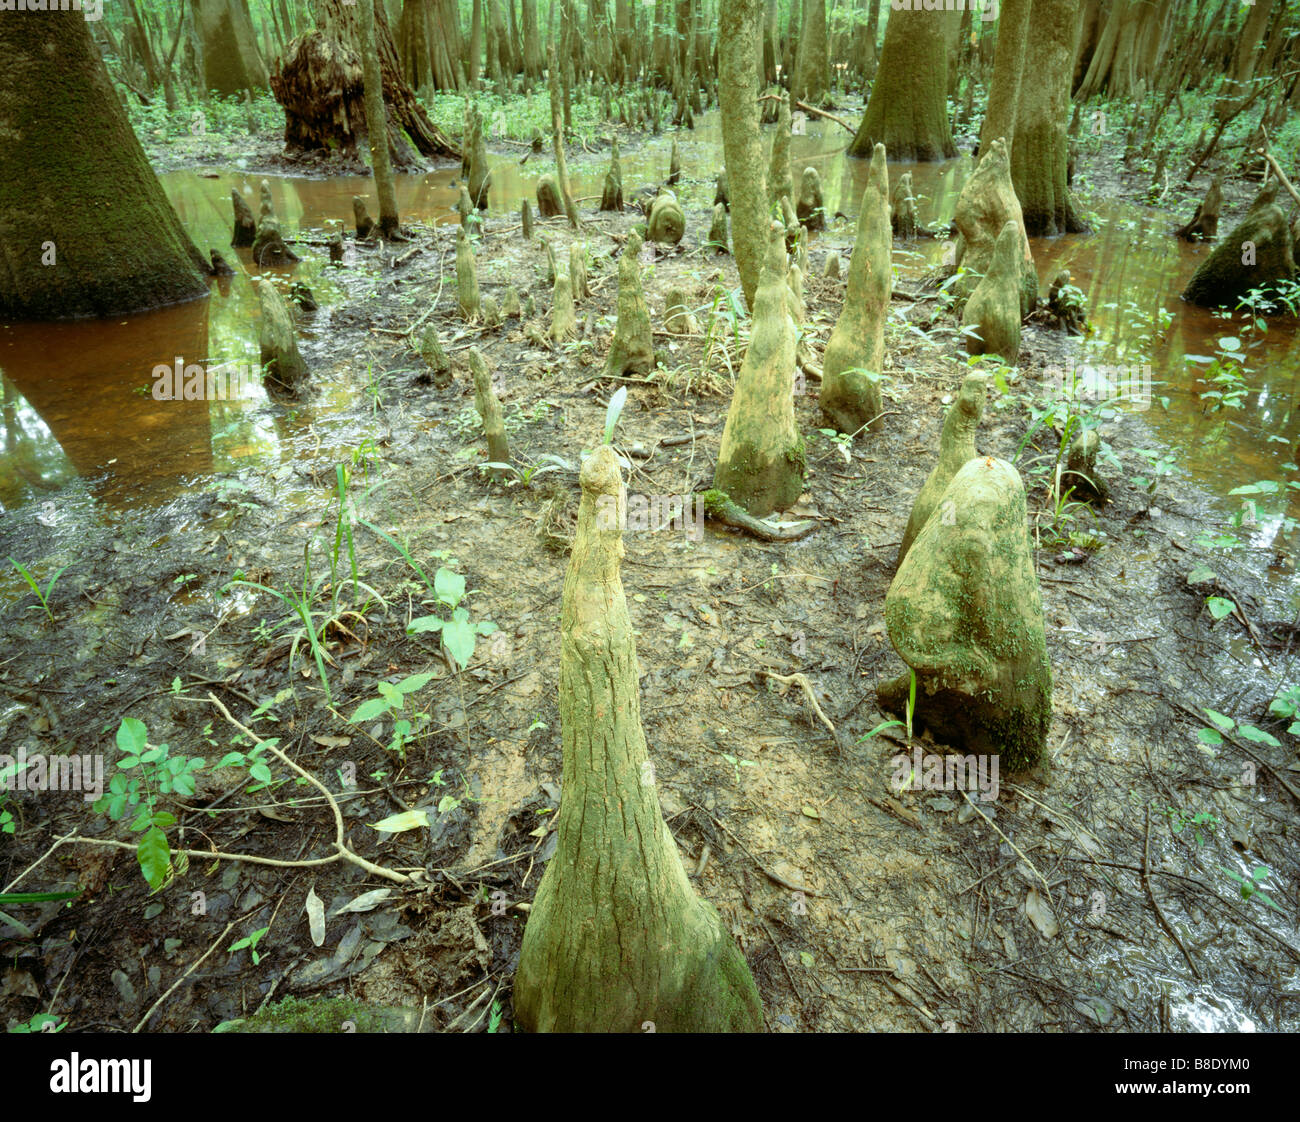 SOUTH CAROLINA  - Cypress knees viewed from the Boardwalk Trail in Congaree National Park. Stock Photo